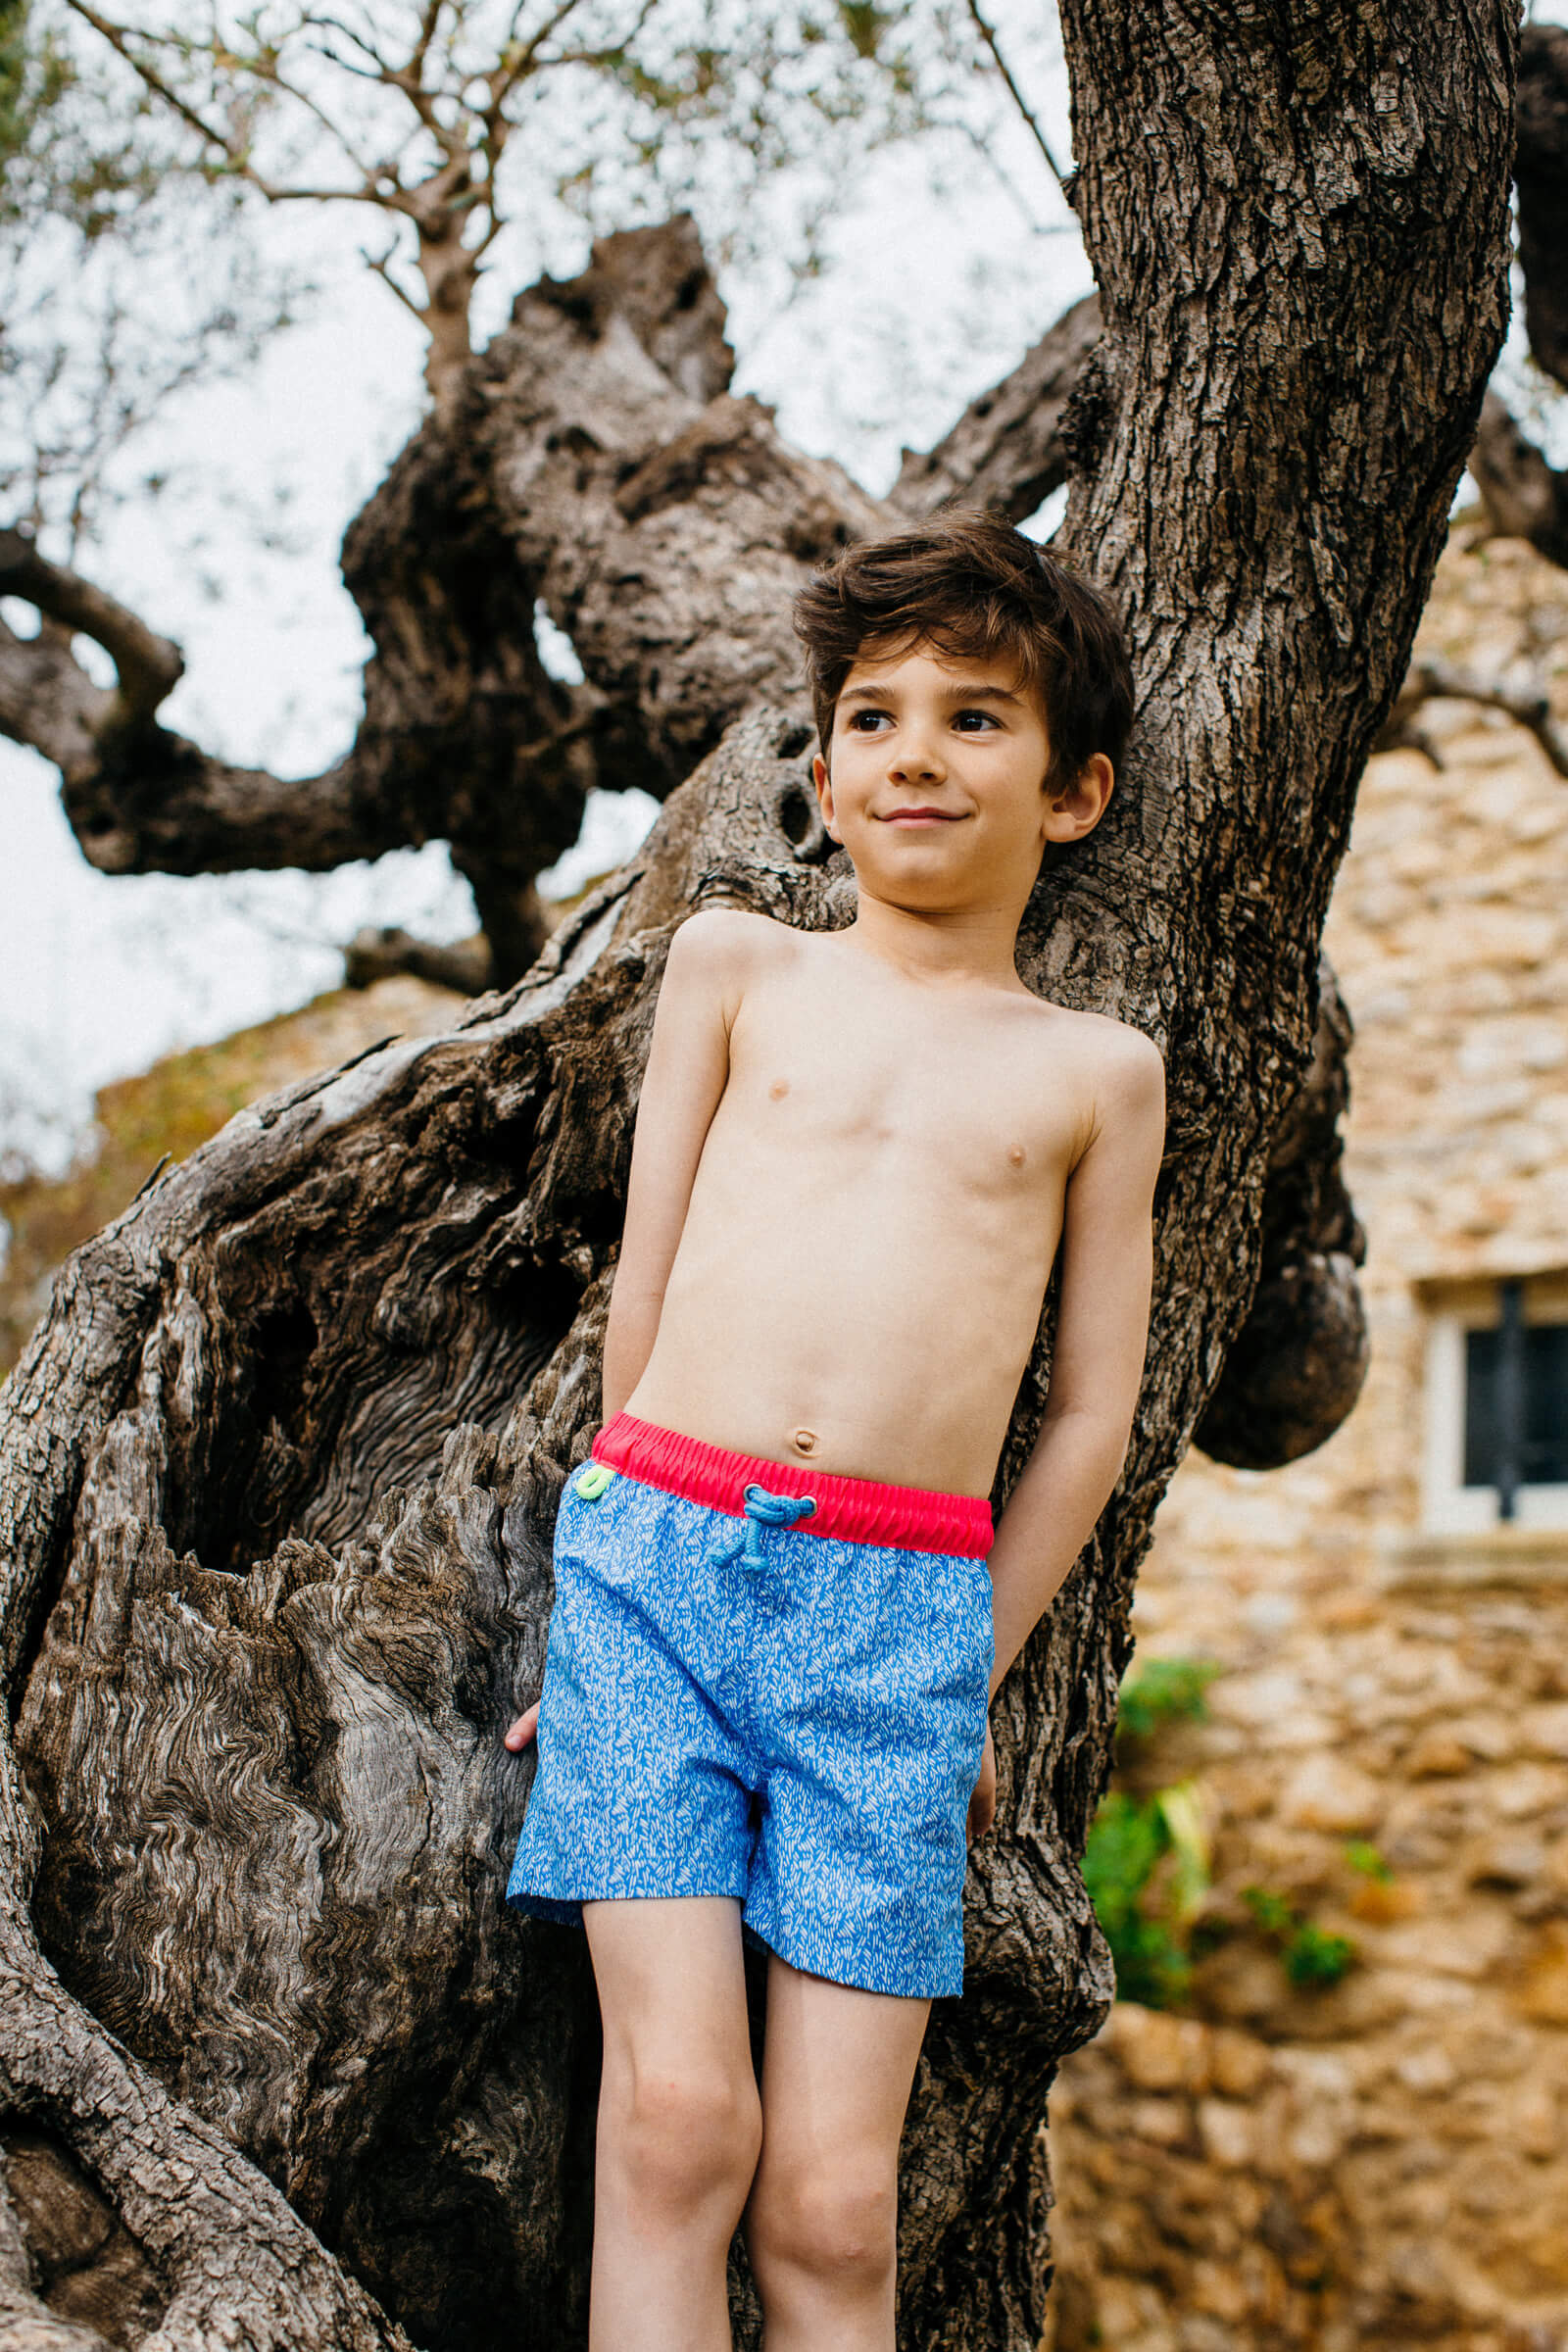 Boy wearing a swimsuit with elasticated belt Meno riviera